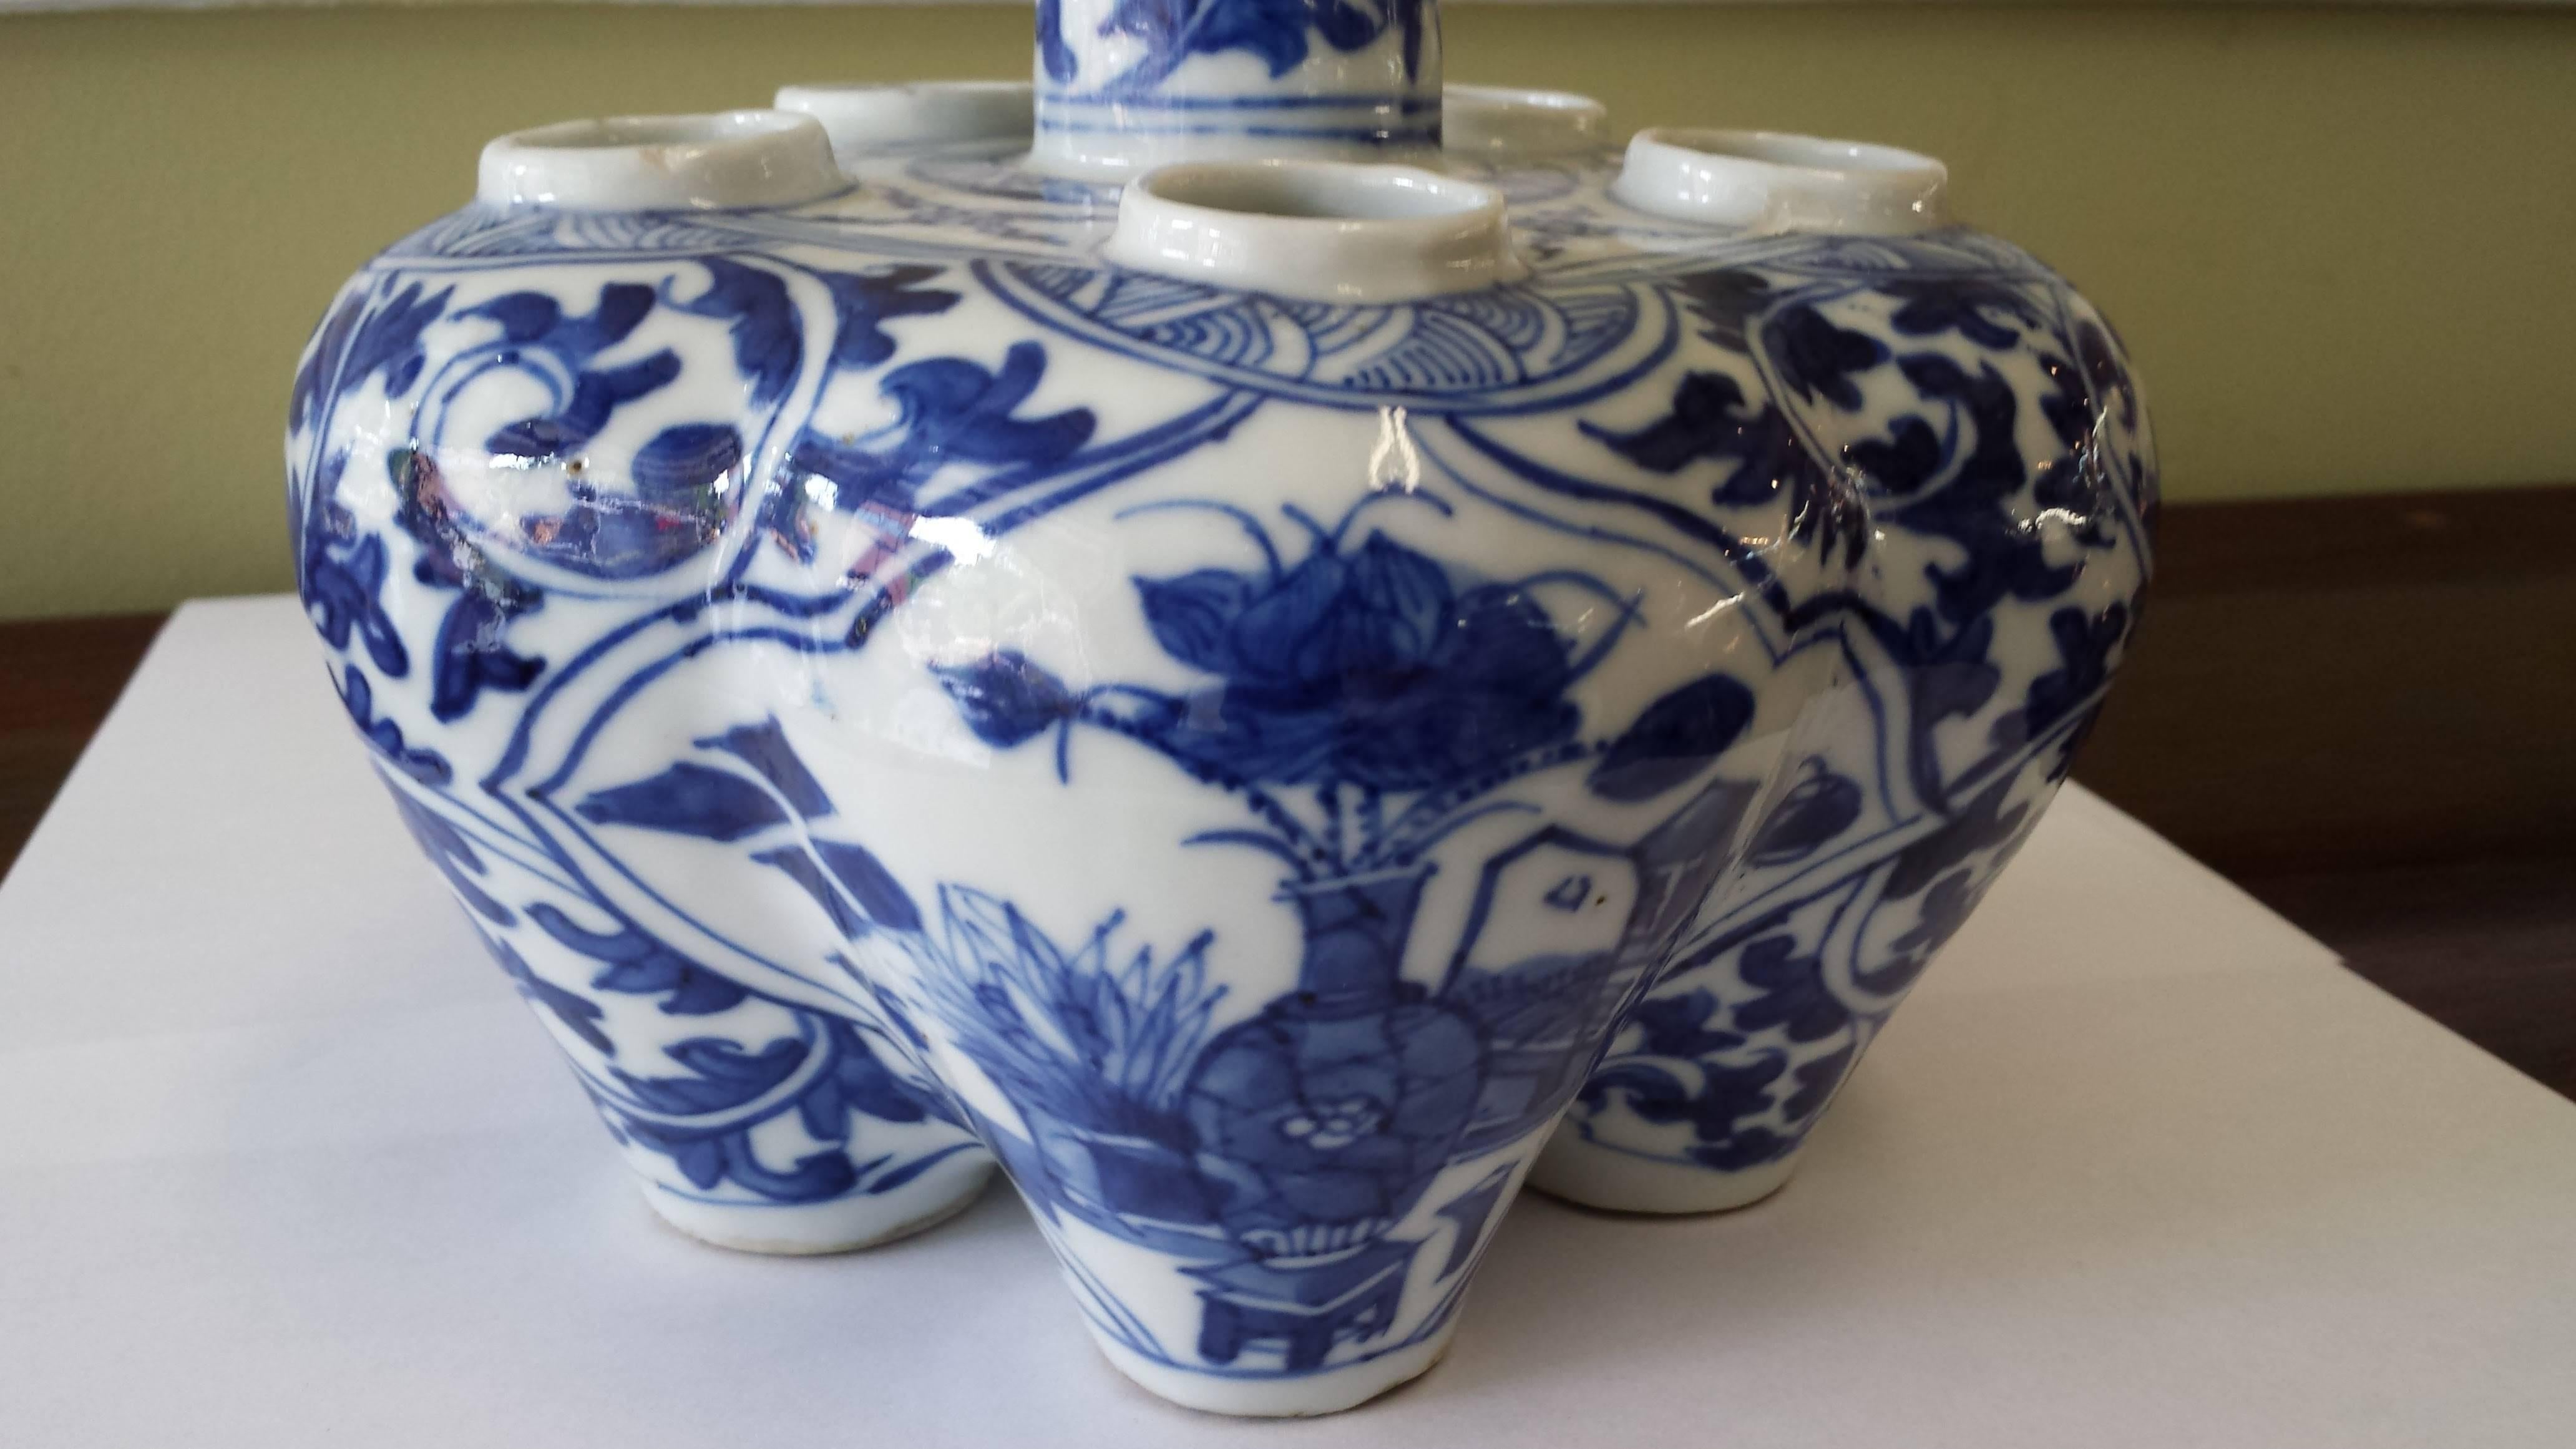 Chinese blue and white tulip/lotus flower vase, 19th century, ogee shaped with five-lower floral inserts and stem/turret shaped top opening for long stem flowers. The vase is nicely decorated with shaped panels containing precious objects with